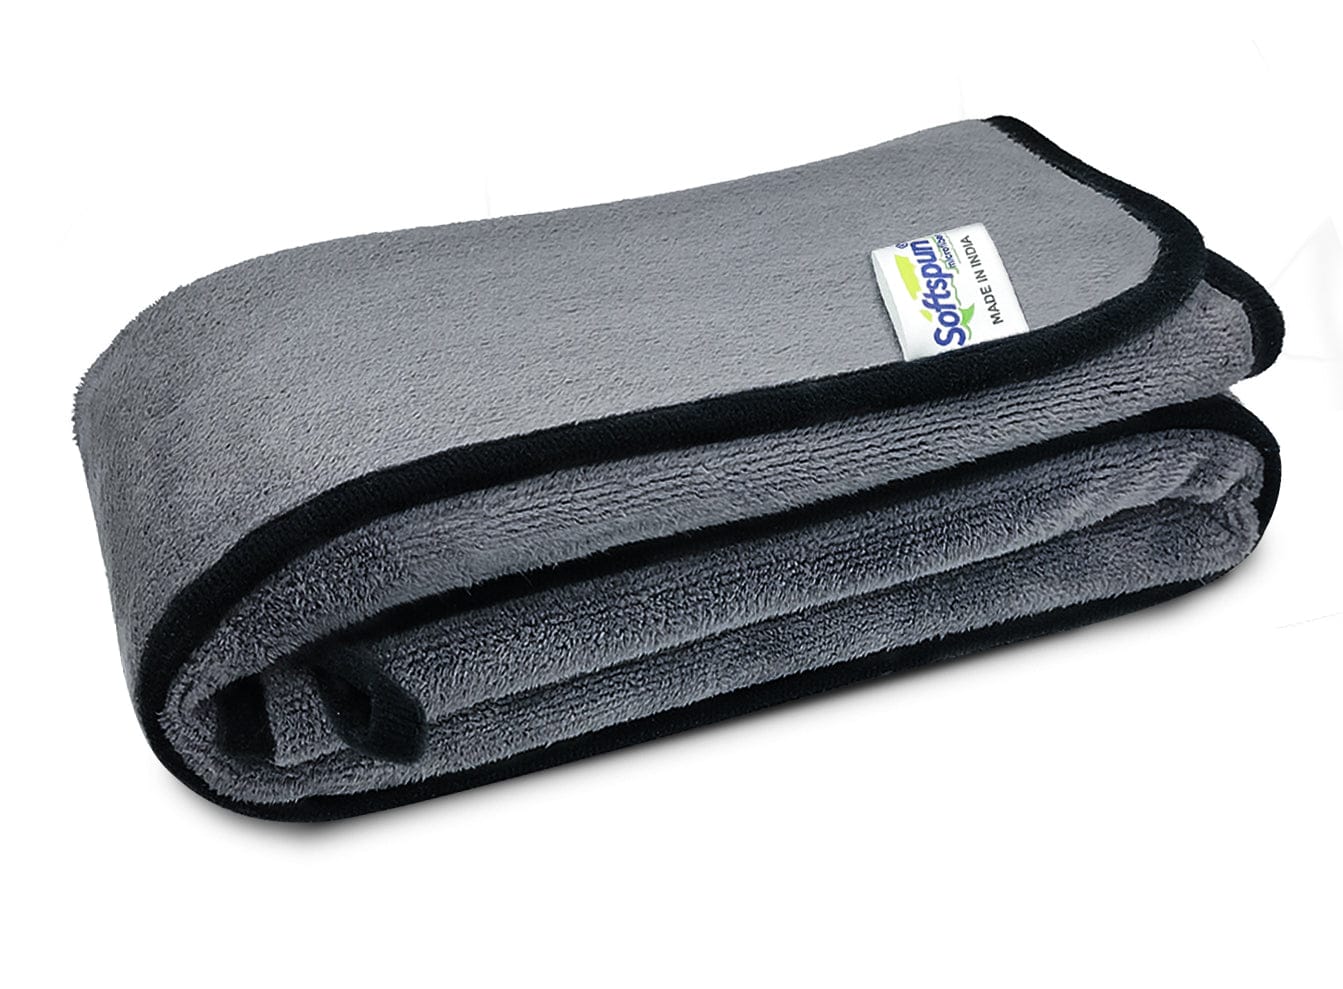 SOFTSPUN Microfiber Super Absorbent Cloth, 500 GSM, Grey! Silk Banded Edge Towel Set, Extra Thick Microfiber Cleaning Cloths Perfect for Bike, Auto, Cars Both Interior and Exterior.